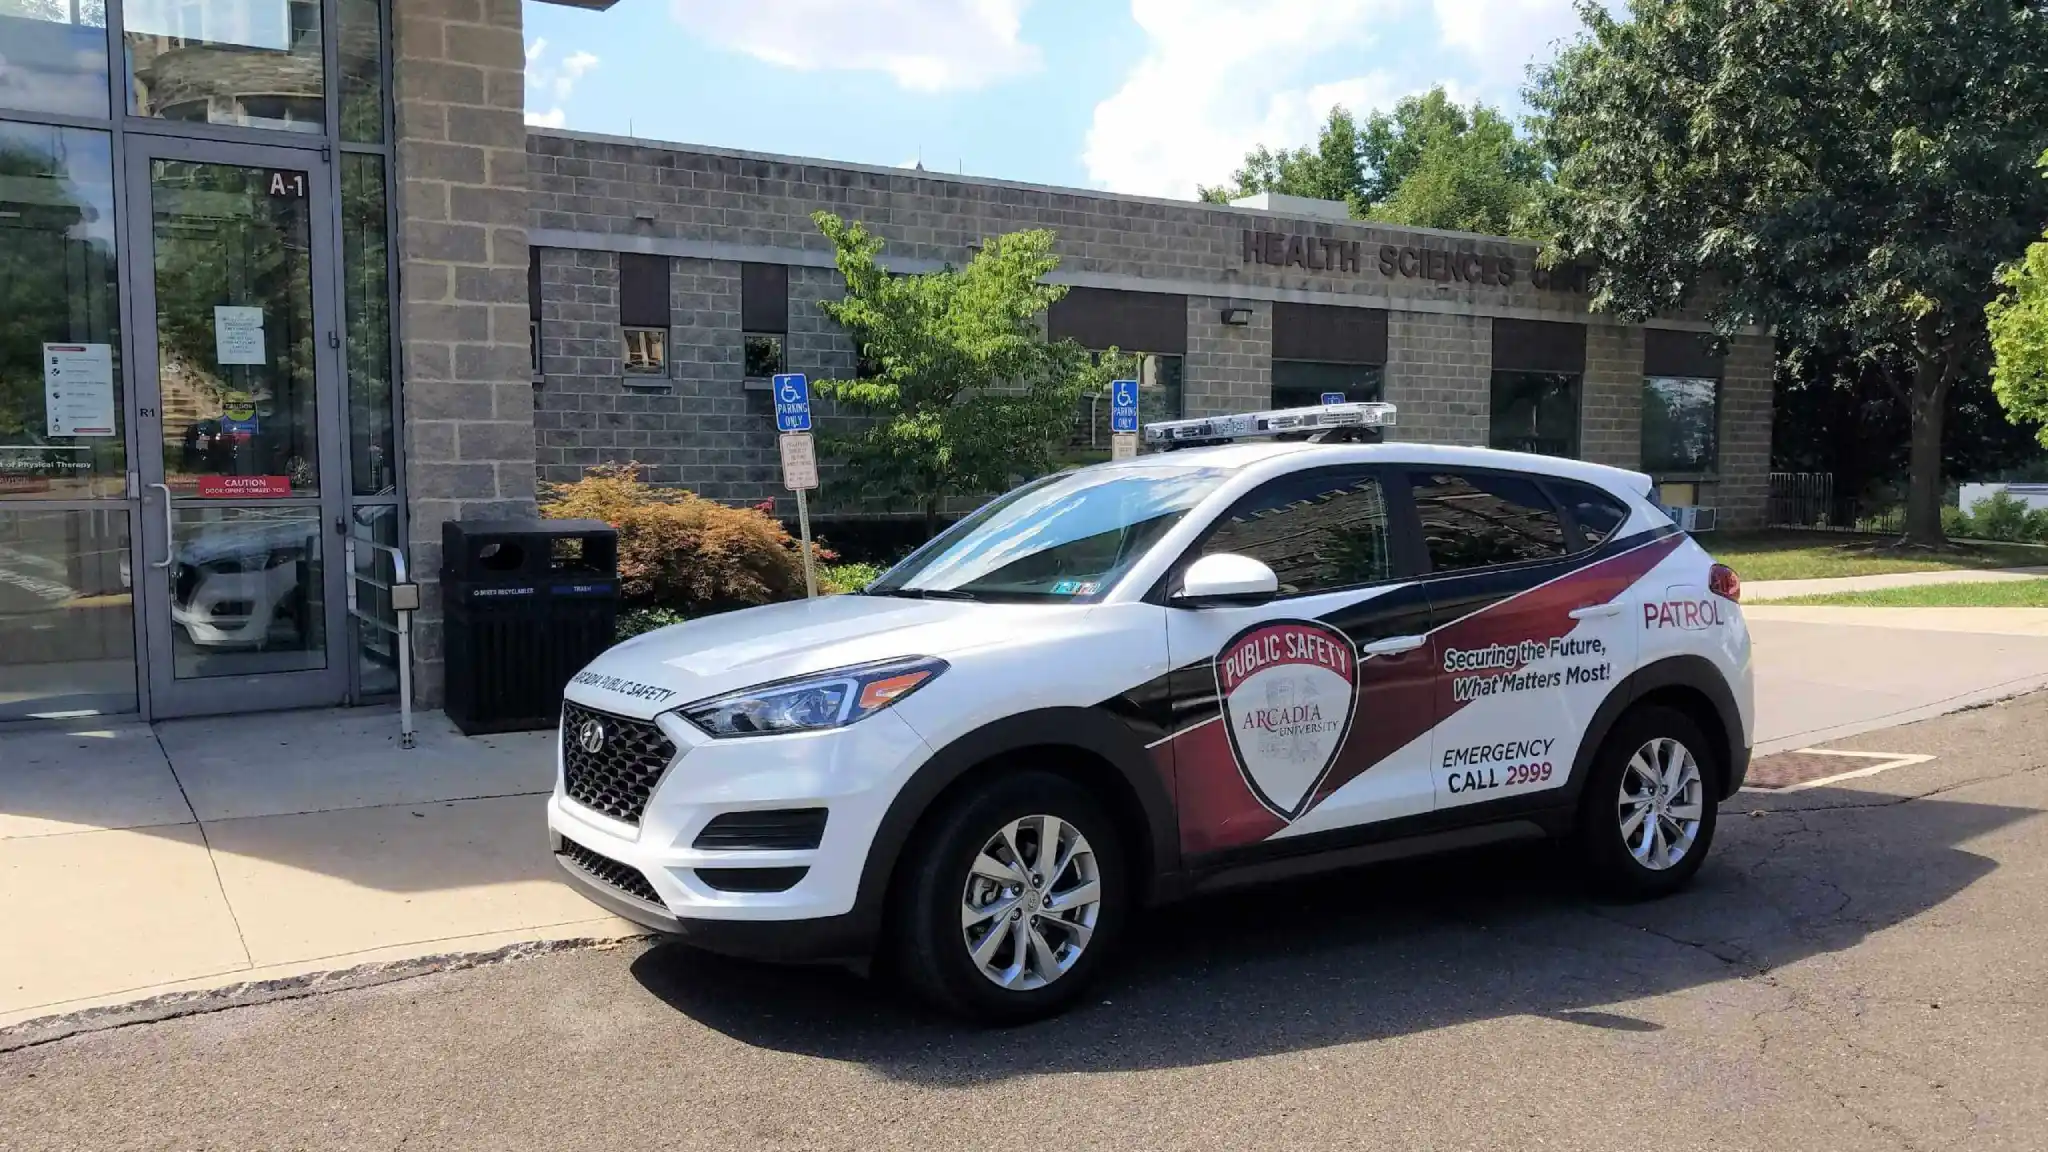 An Arcadia University Public Safety patrol car is parked next to a building on campus